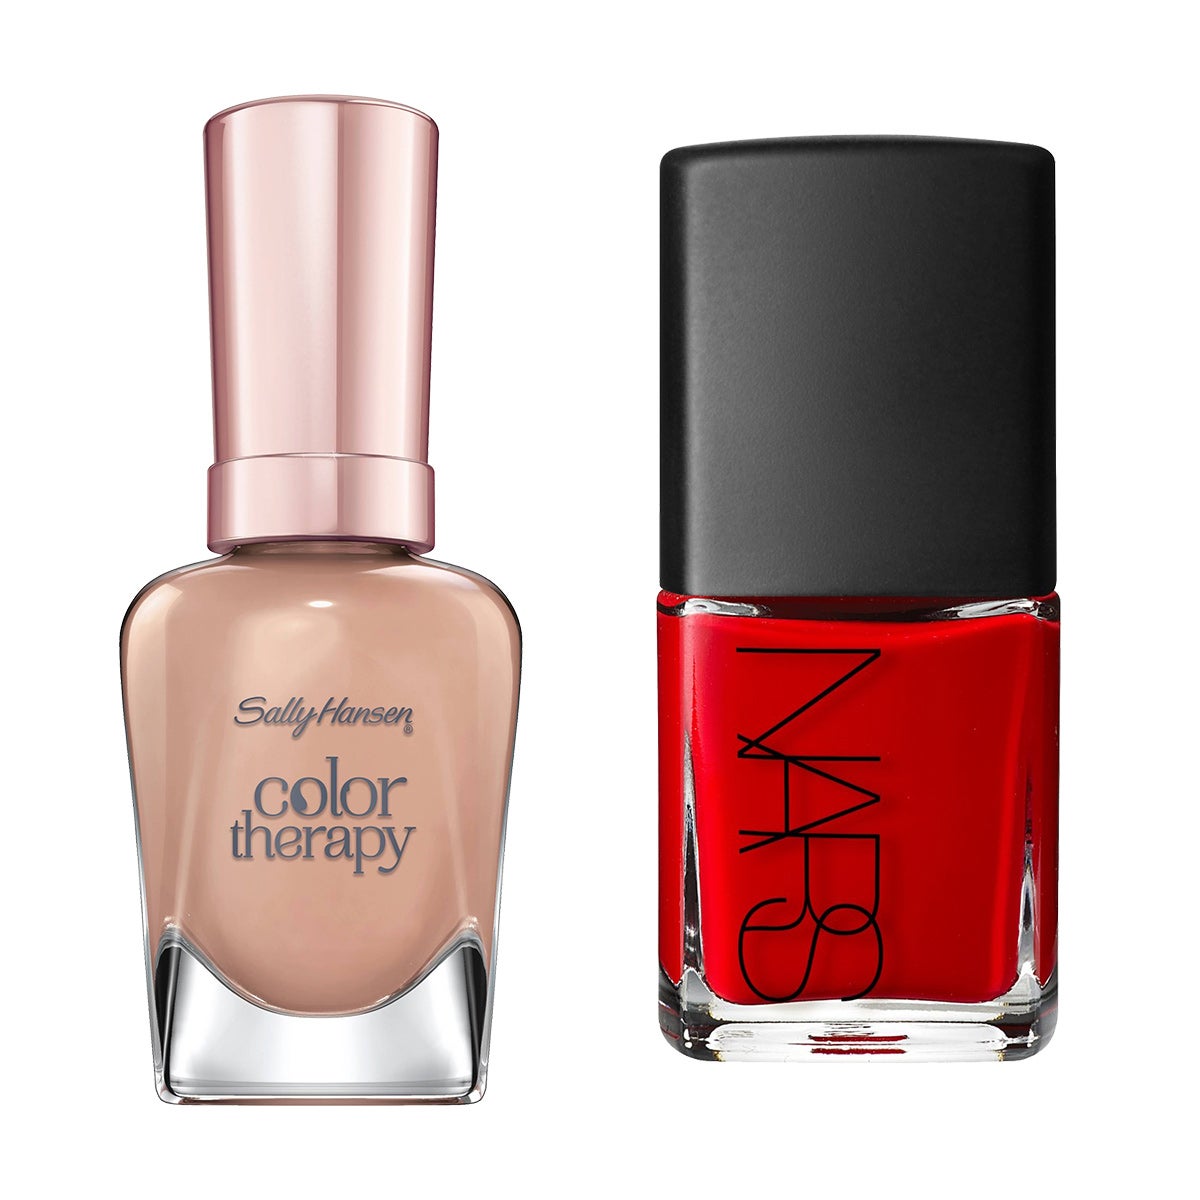 7 Mani & Pedi Nail Polish Combinations to Try this Summer
